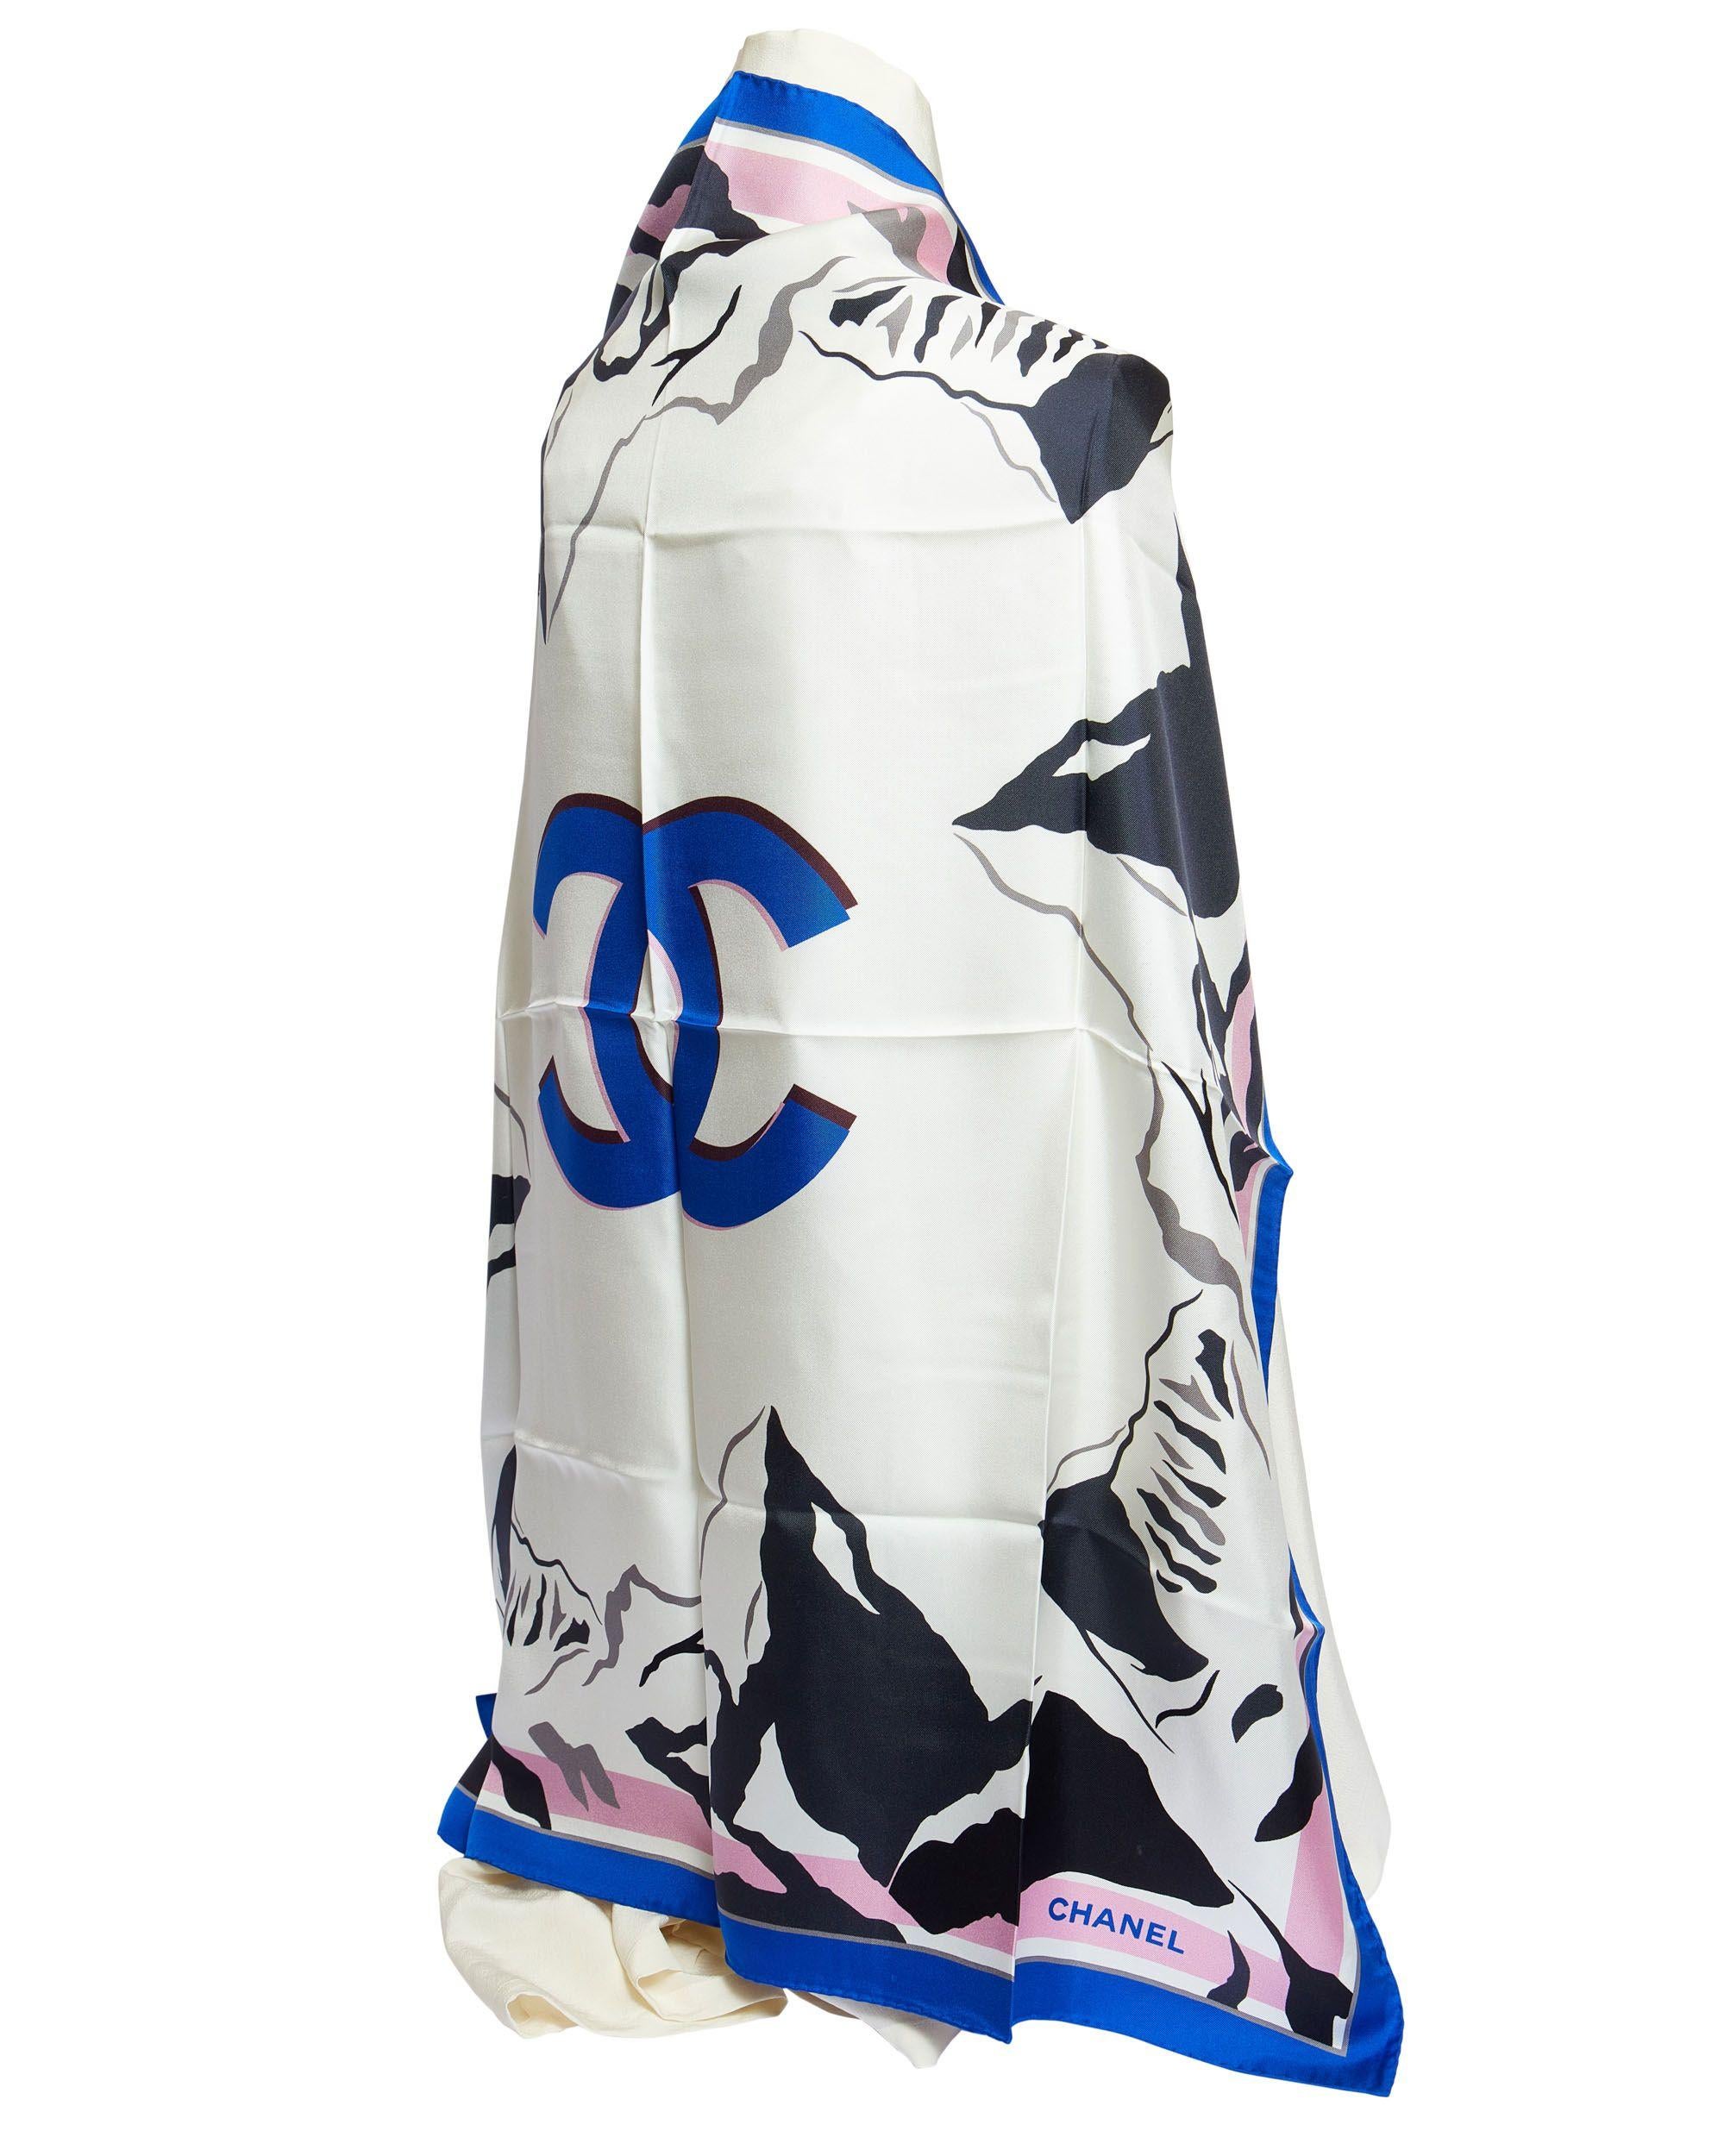 New Chanel silk scarf with big blue CC logo in the center which is surrounded by black mountains like the Alpes. The trim is blue and the edges are hand rolled. The scarf is 100% silk.